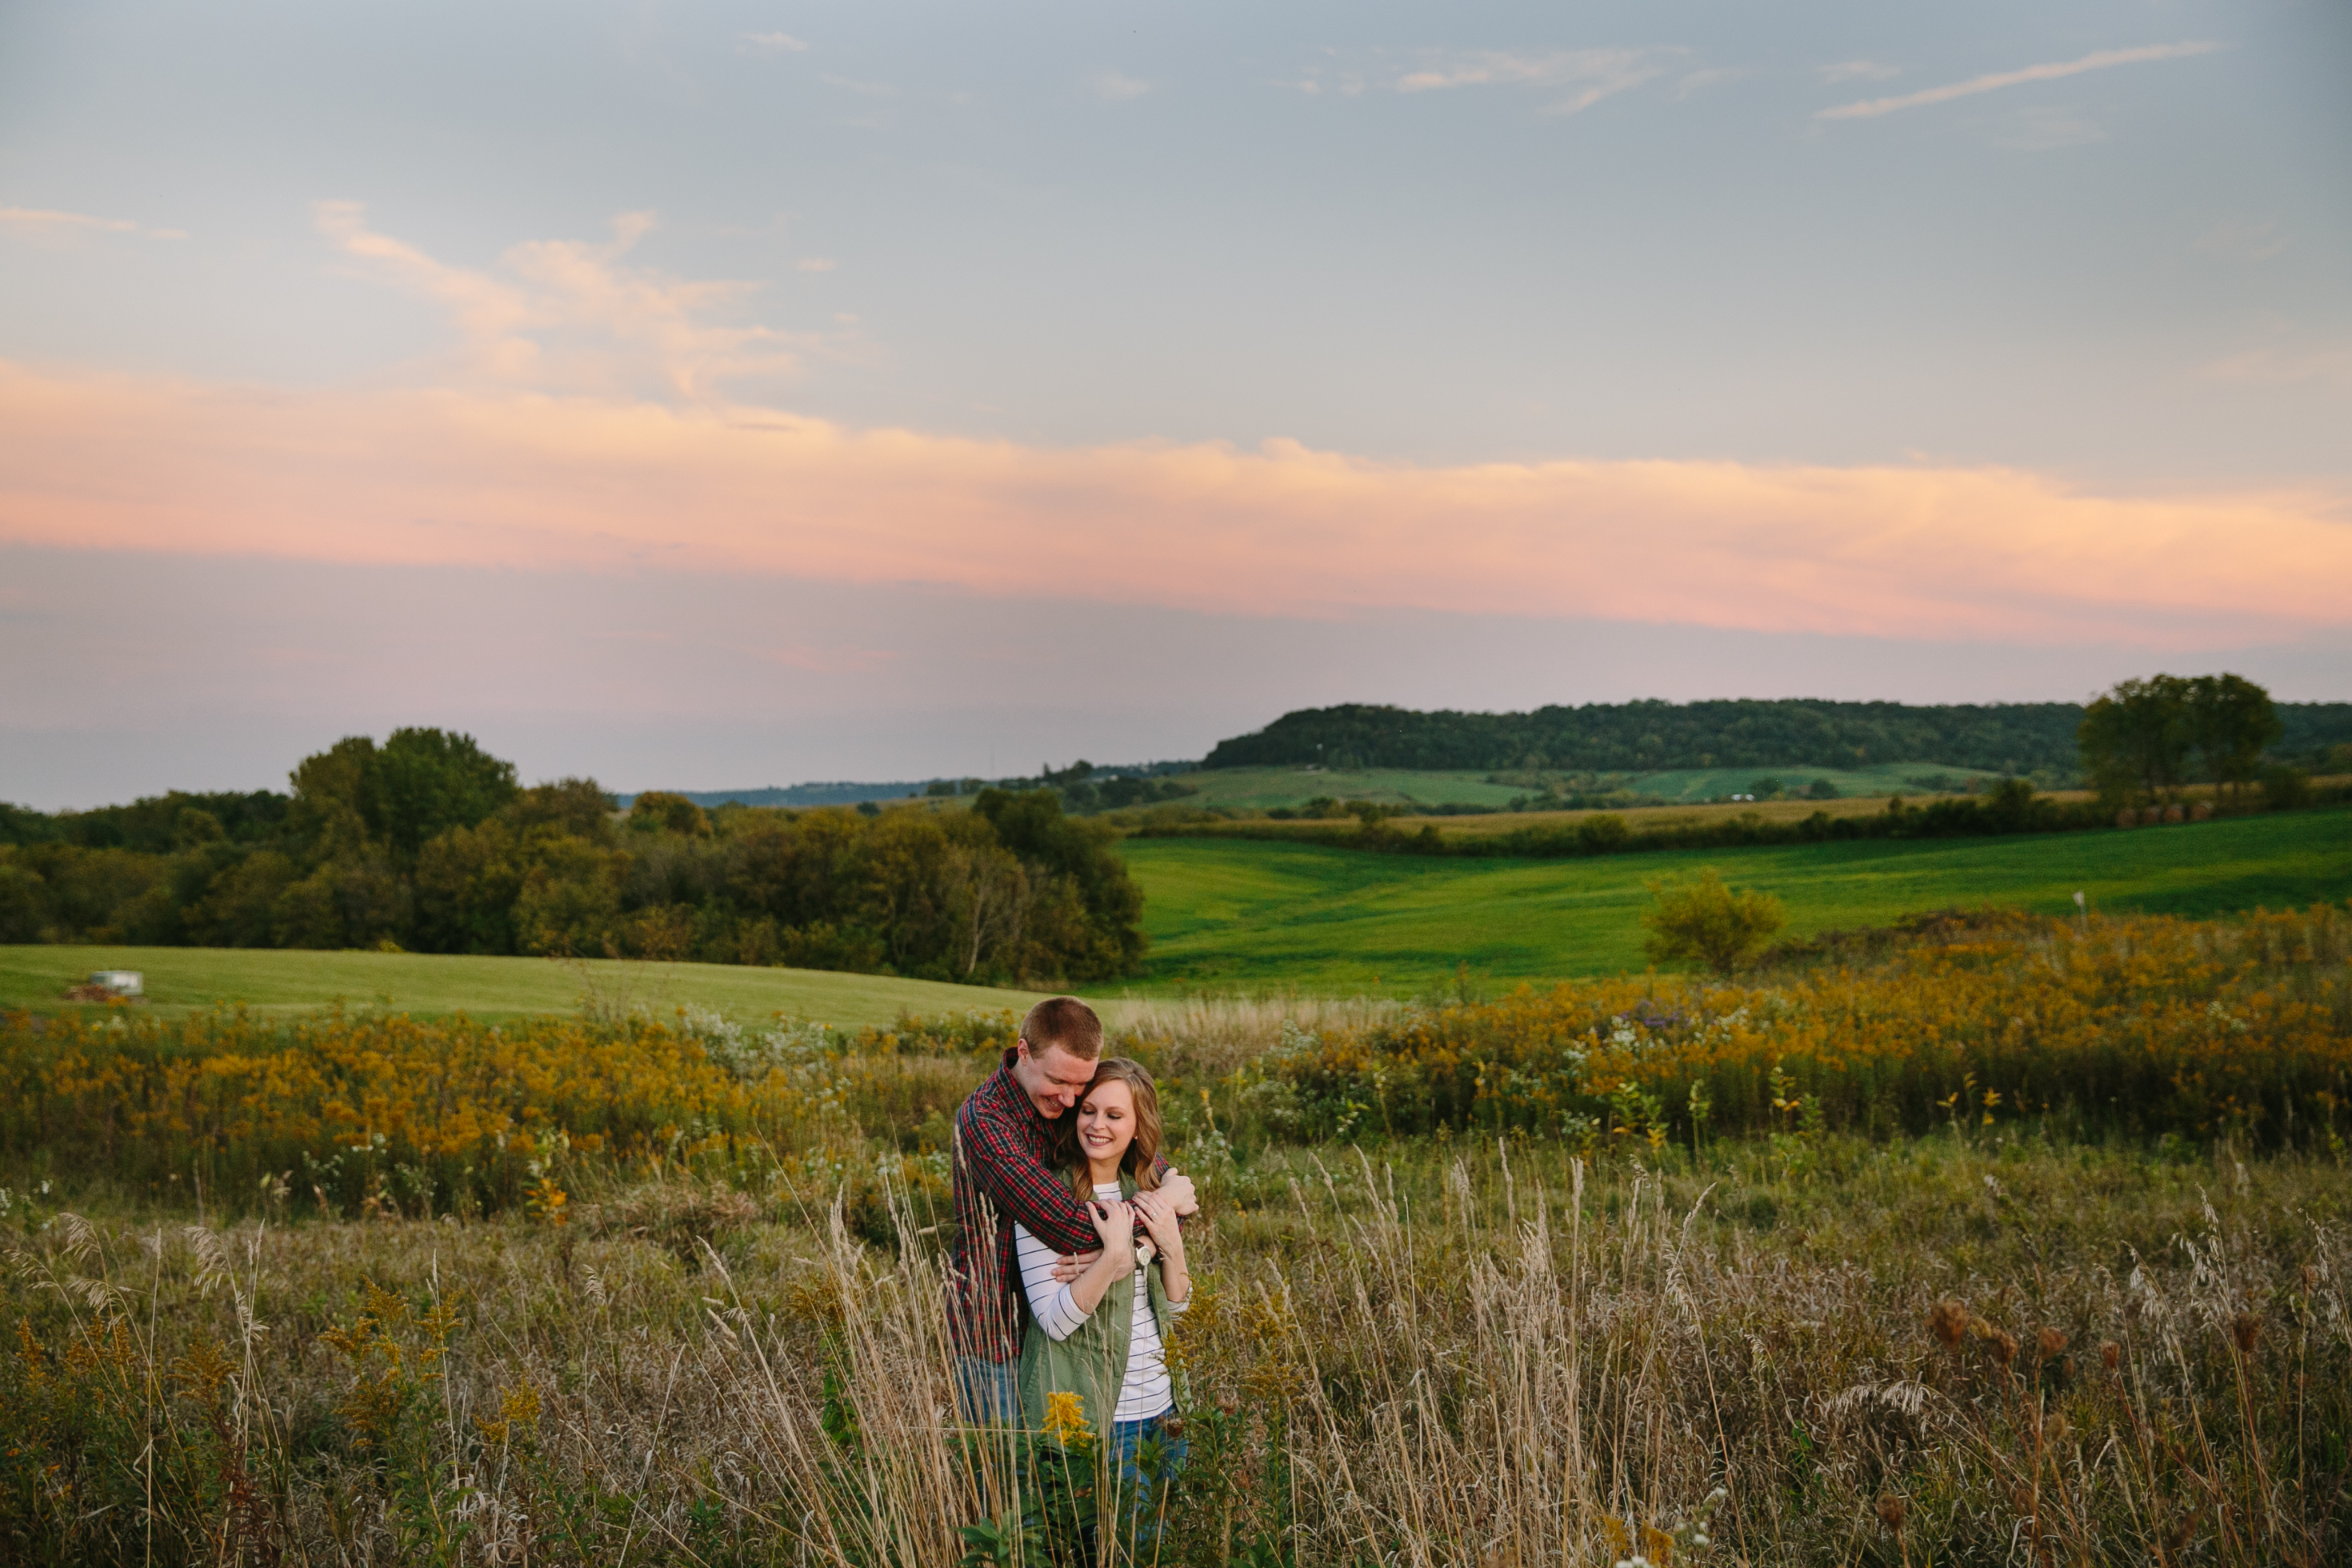 mines of spain dubuque outdoor engagement photos by catherine furlin photography